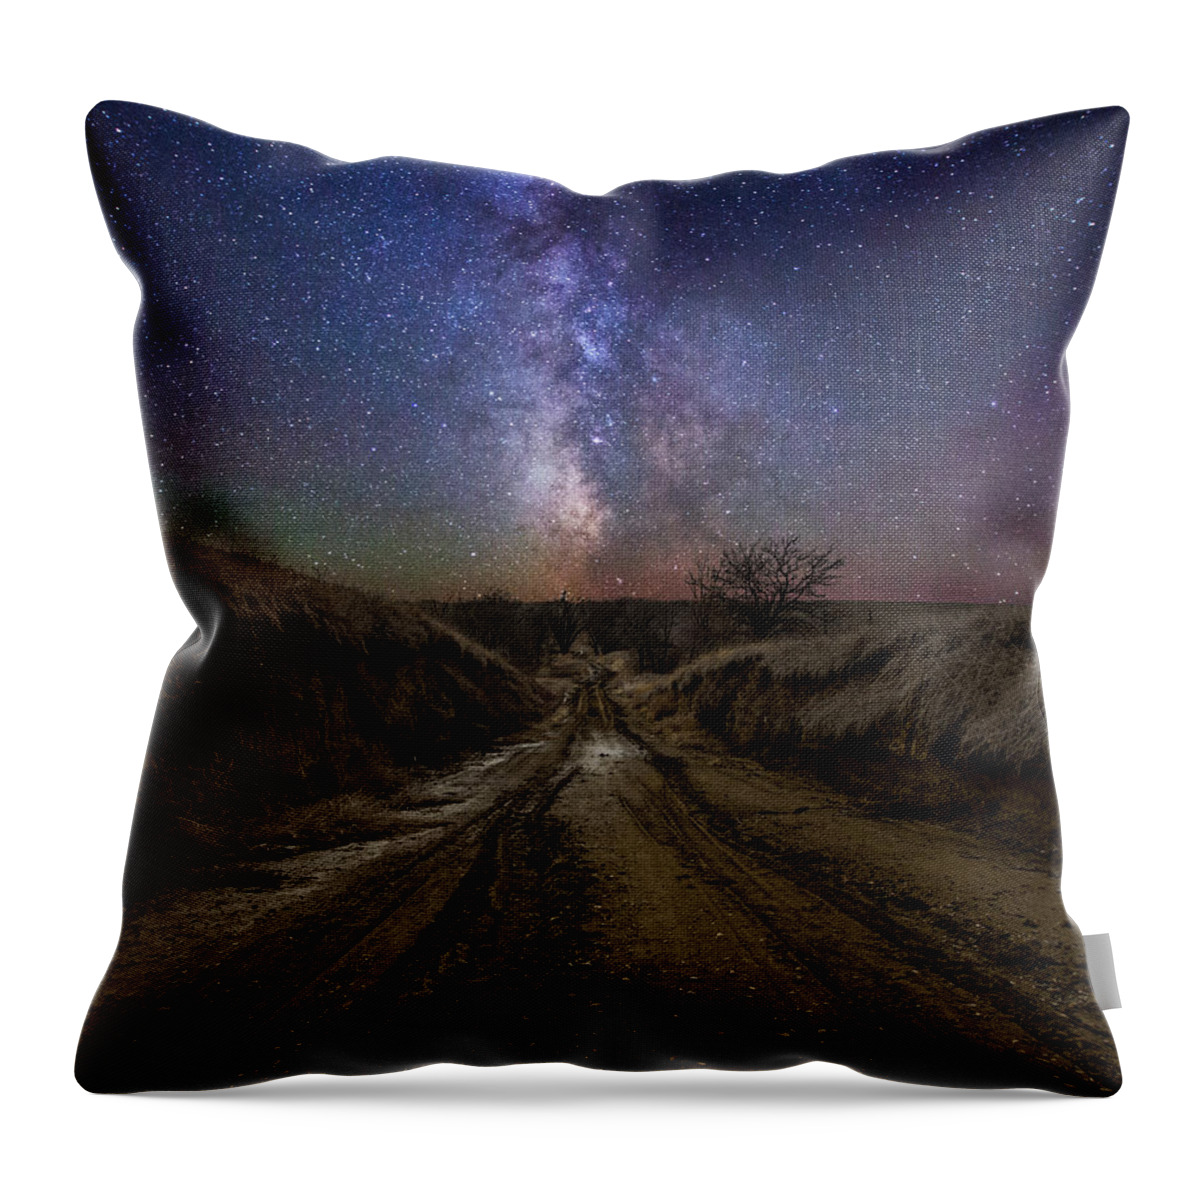  Throw Pillow featuring the photograph Crossroads to Creation by Aaron J Groen